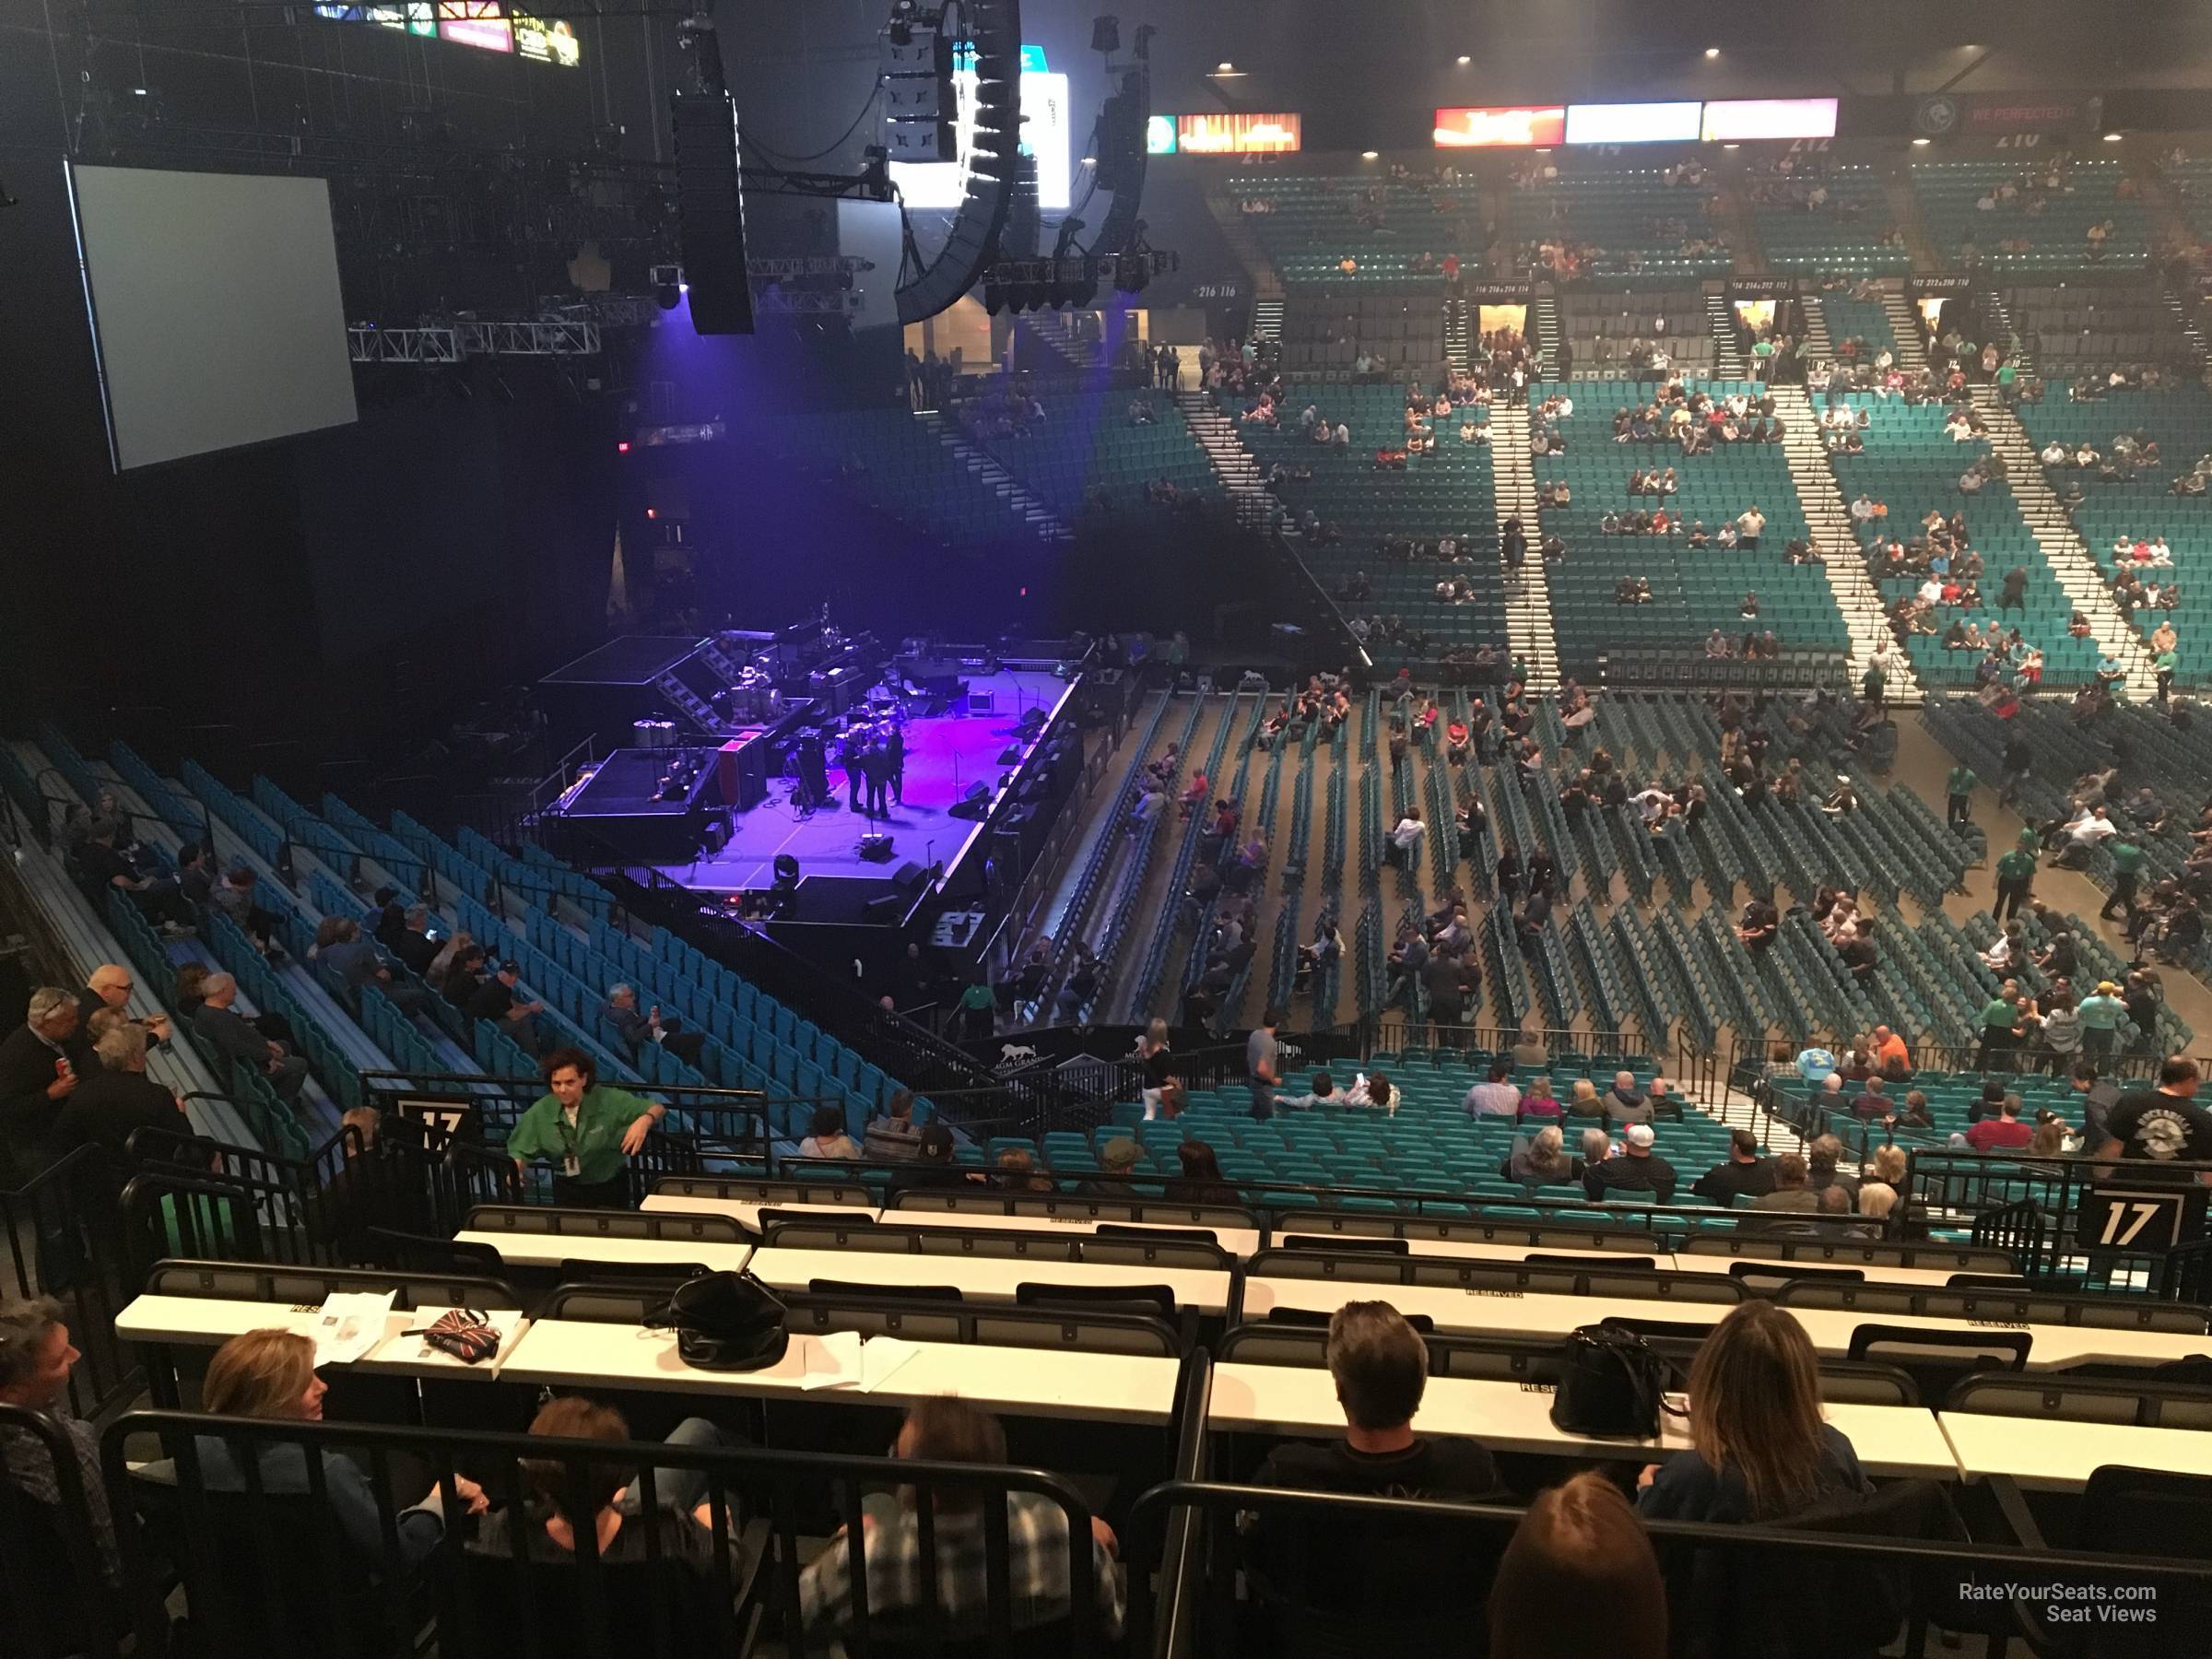 Mgm Grand Garden Arena Section 217 Rateyourseats Com